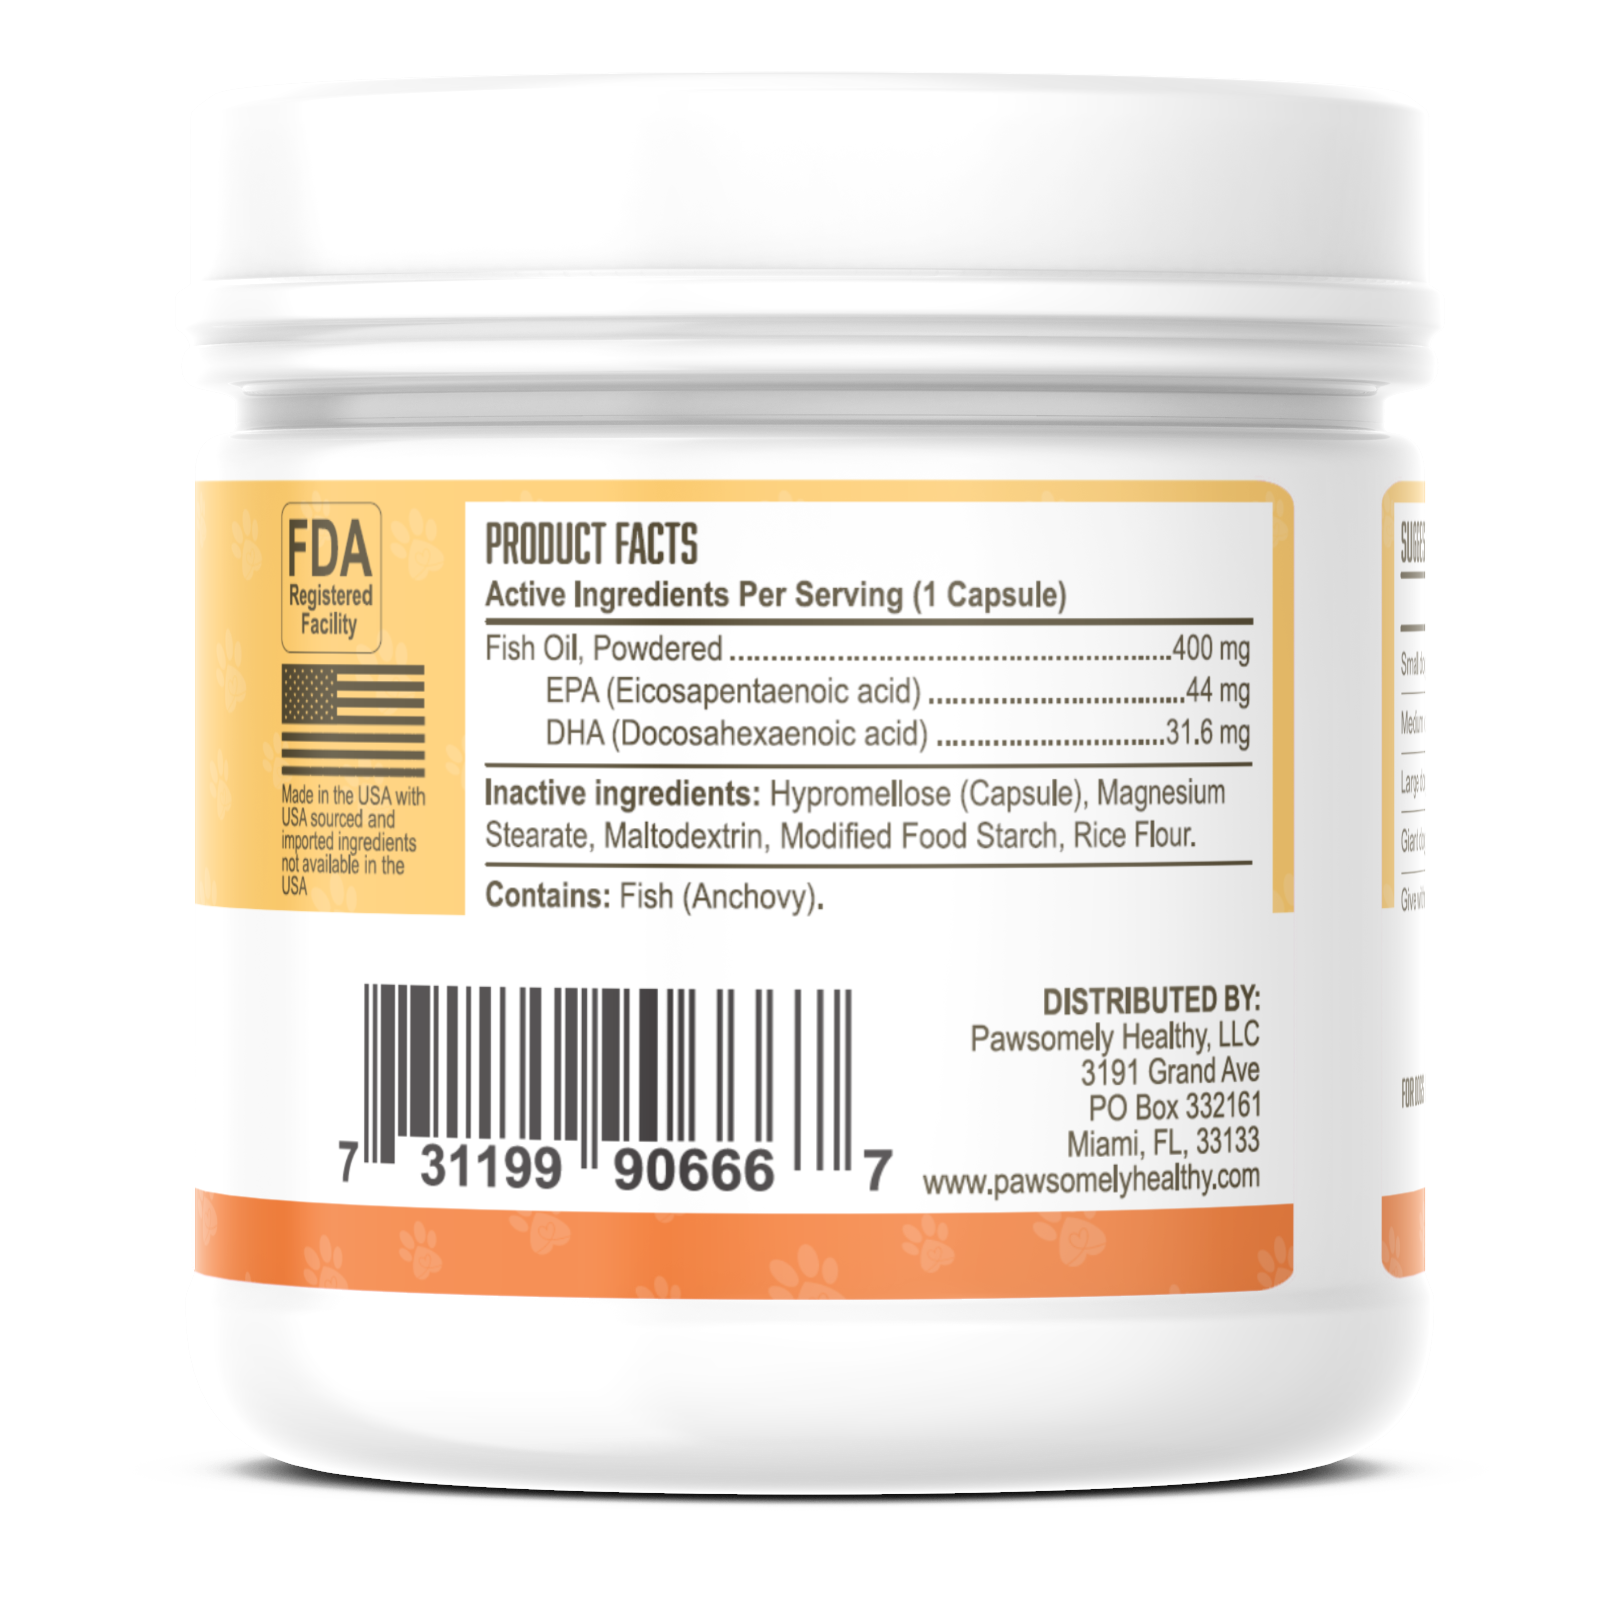 Label with ingredients for Pawsomely Healthy omega-3 dog supplement